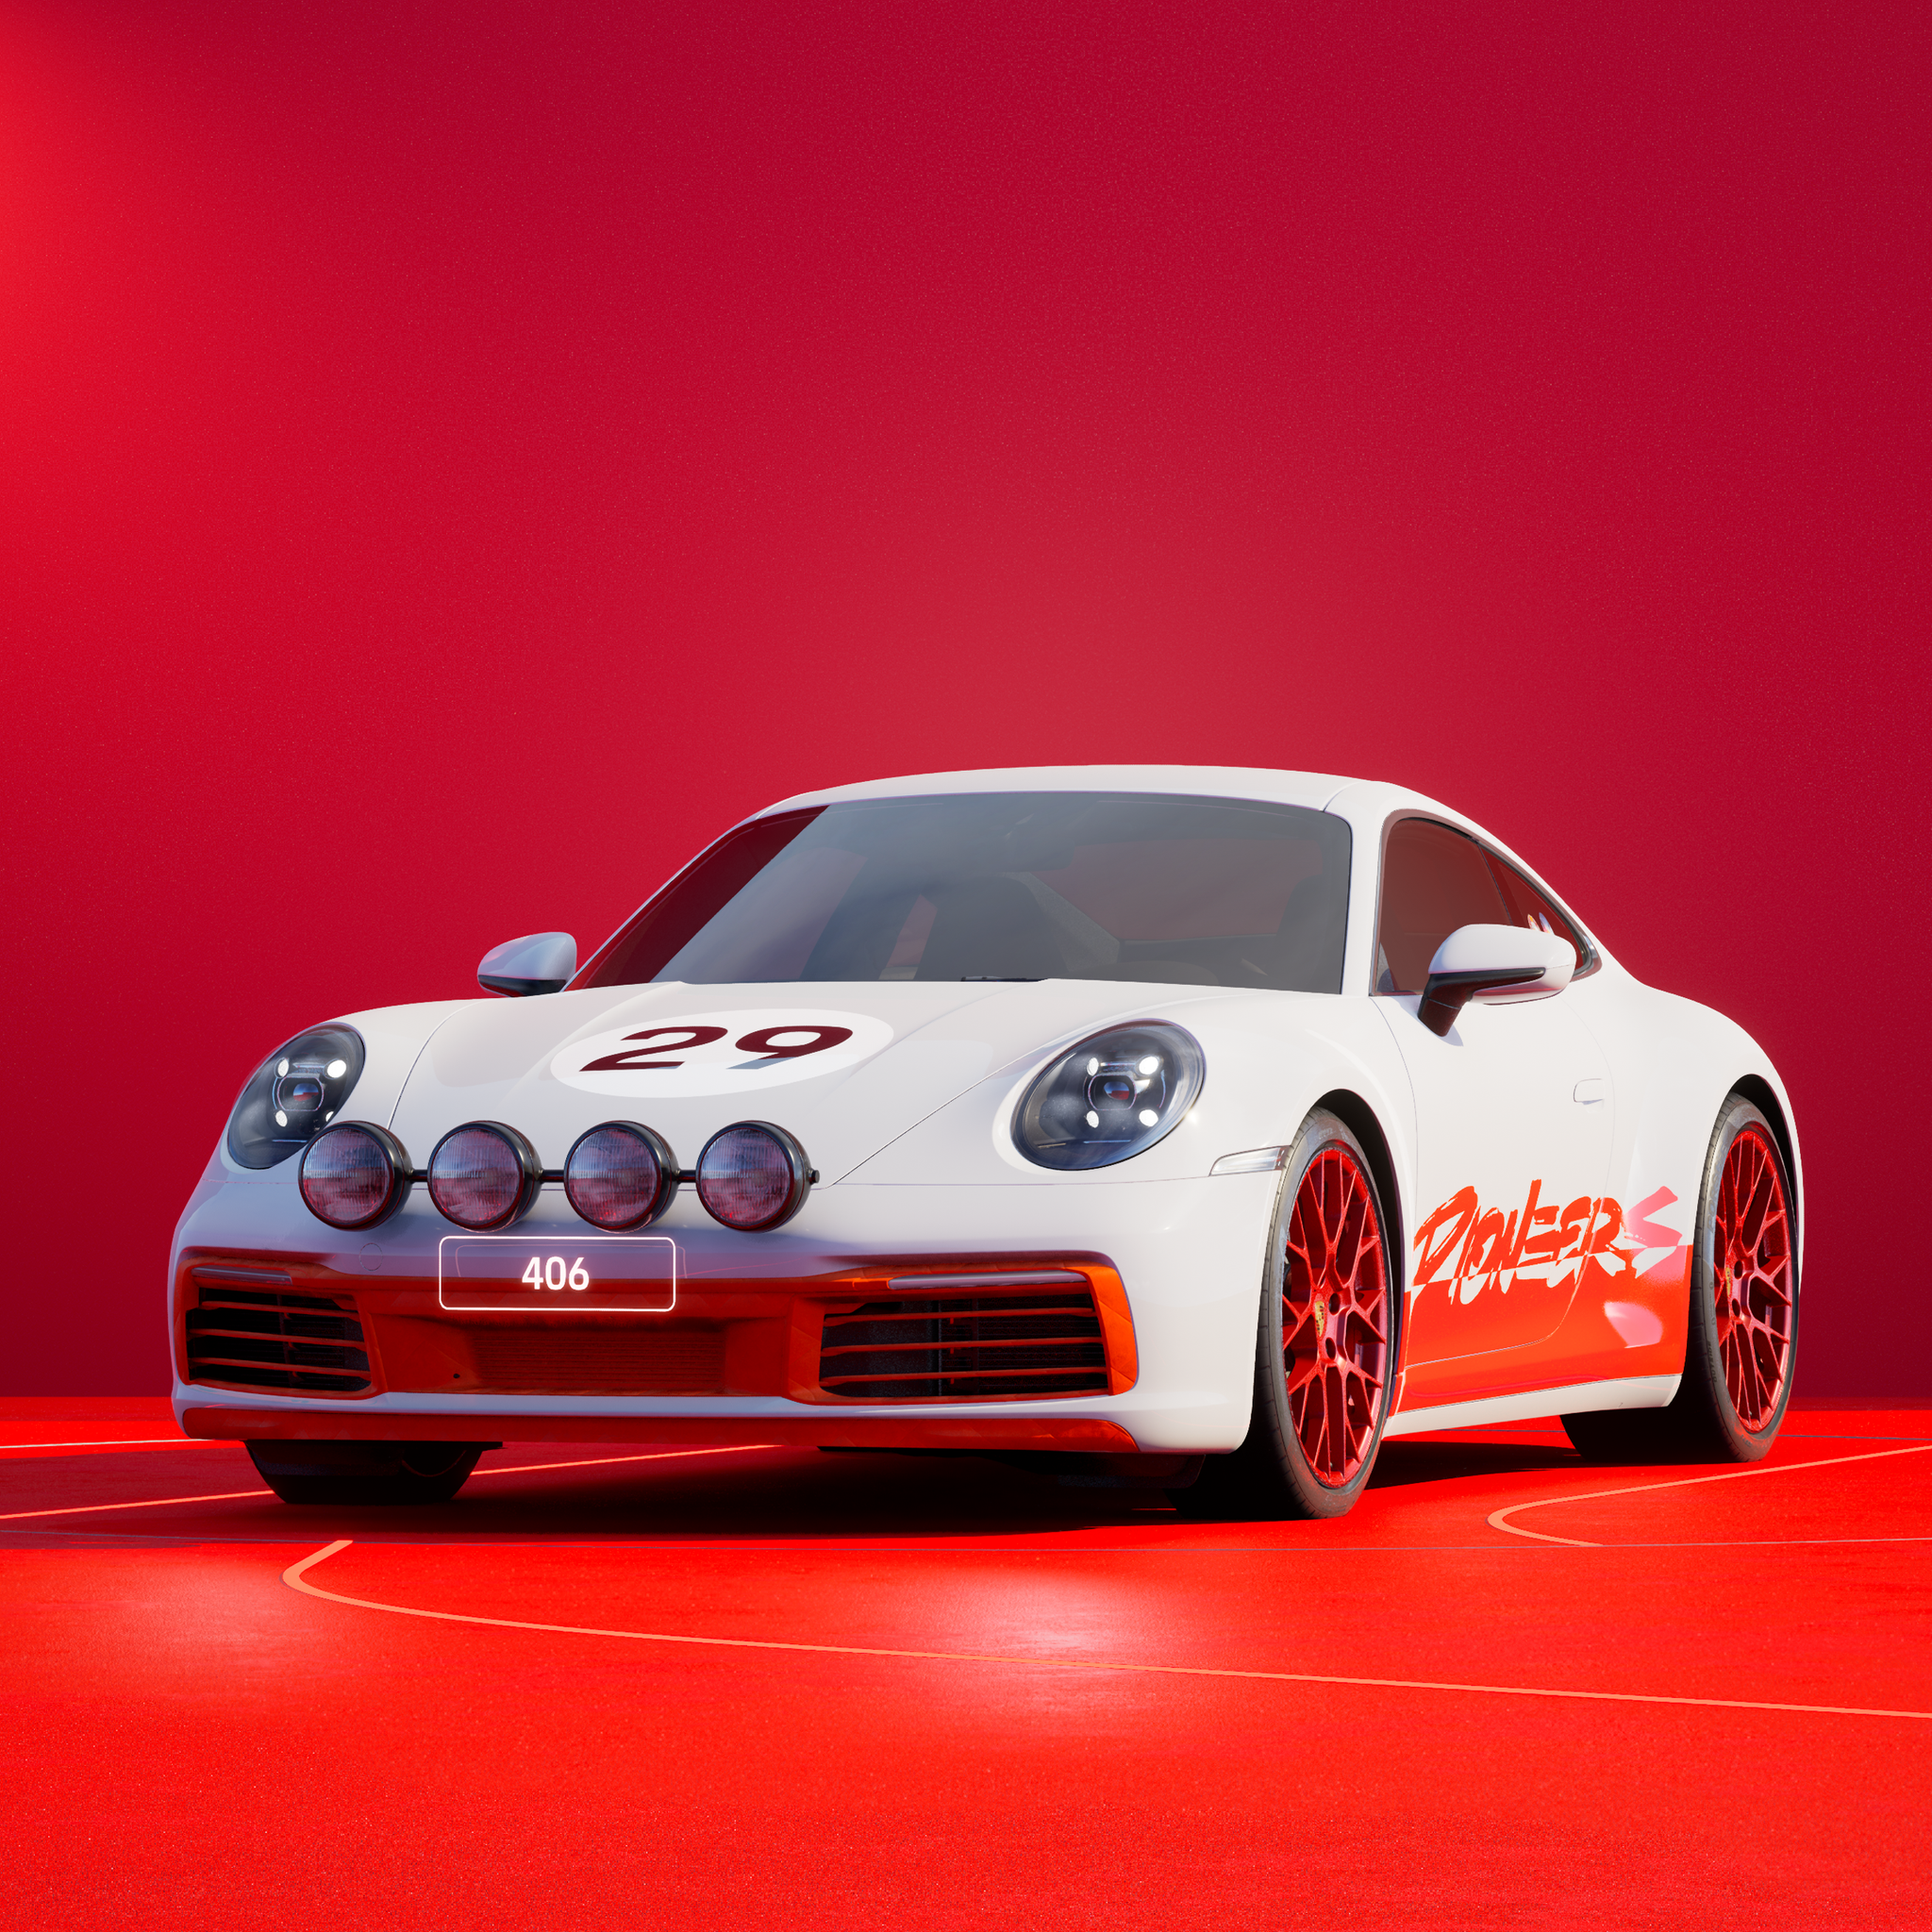 The PORSCHΞ 911 406 image in phase